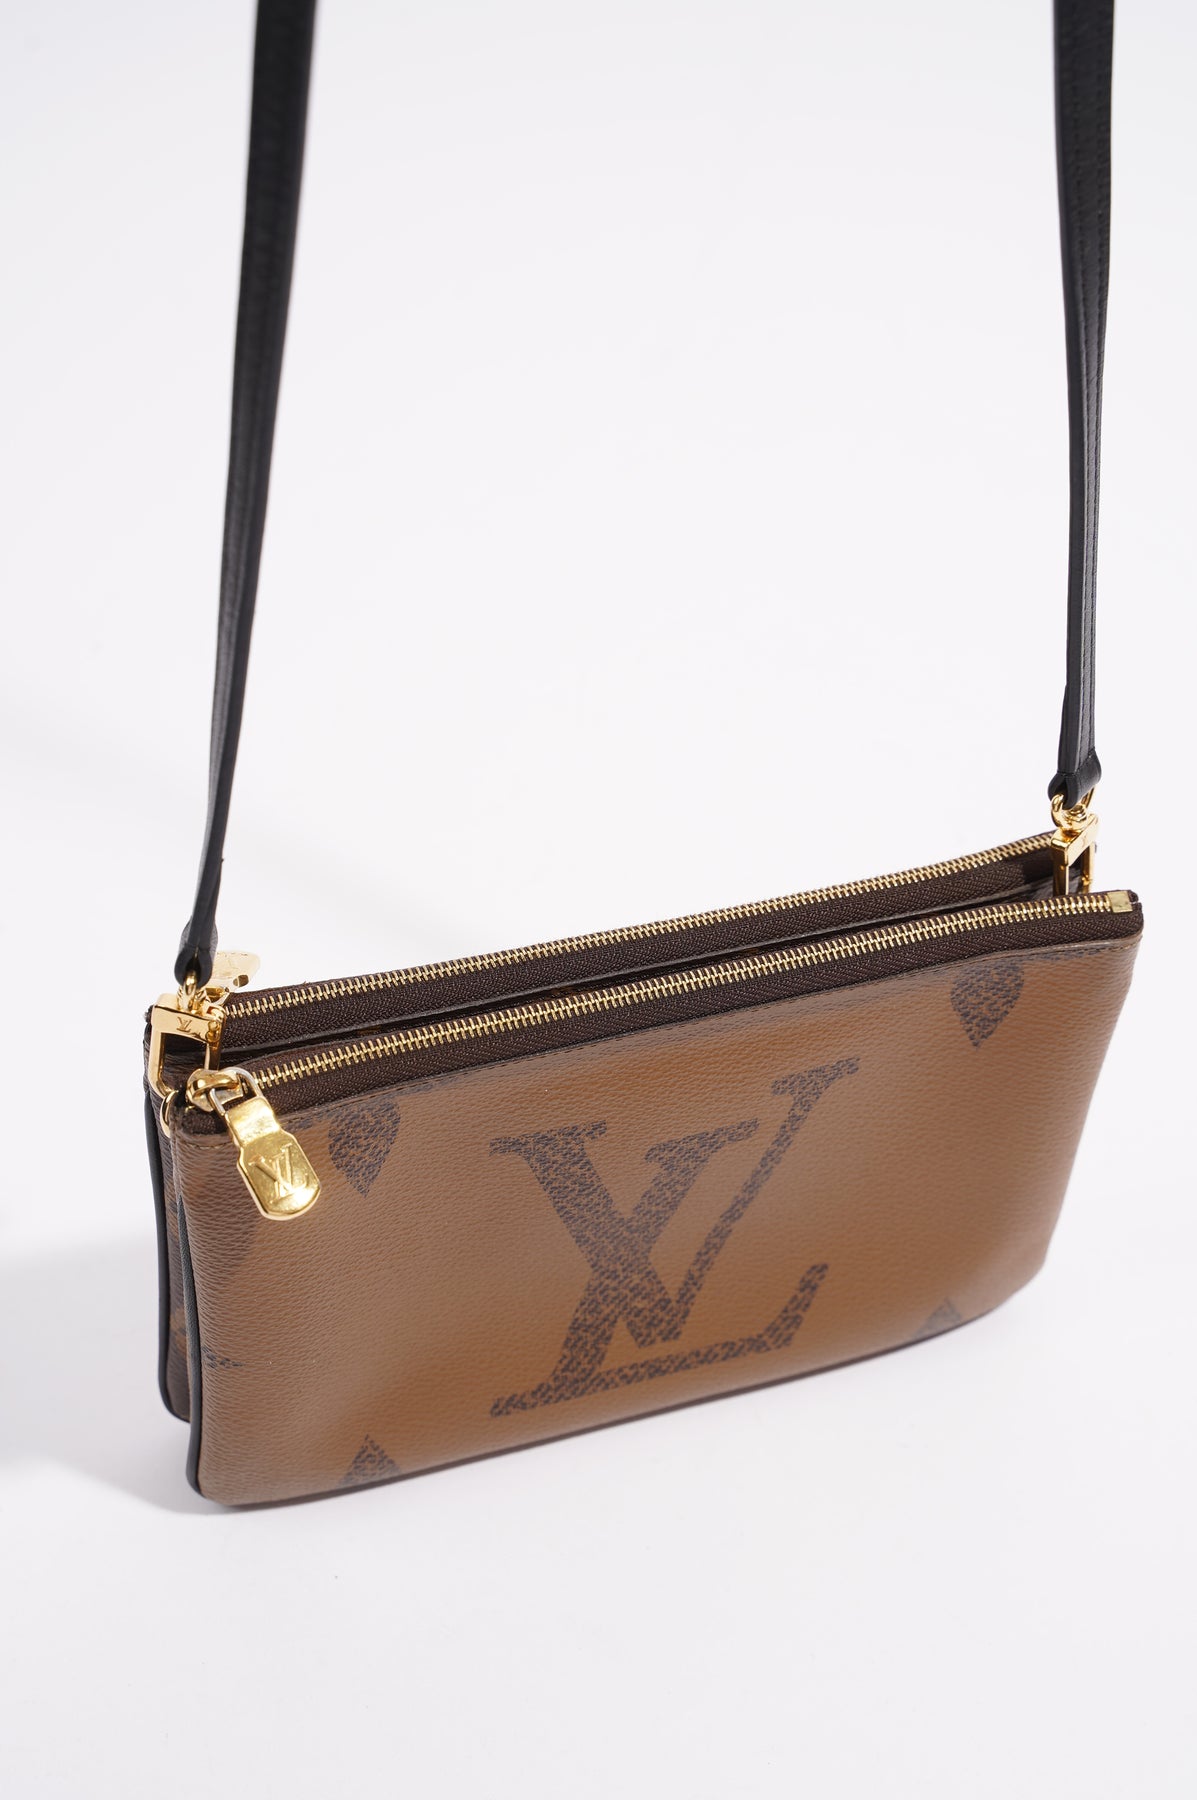 WHAT FITS IN THE Louis Vuitton DOUBLE ZIP POCHETTE 